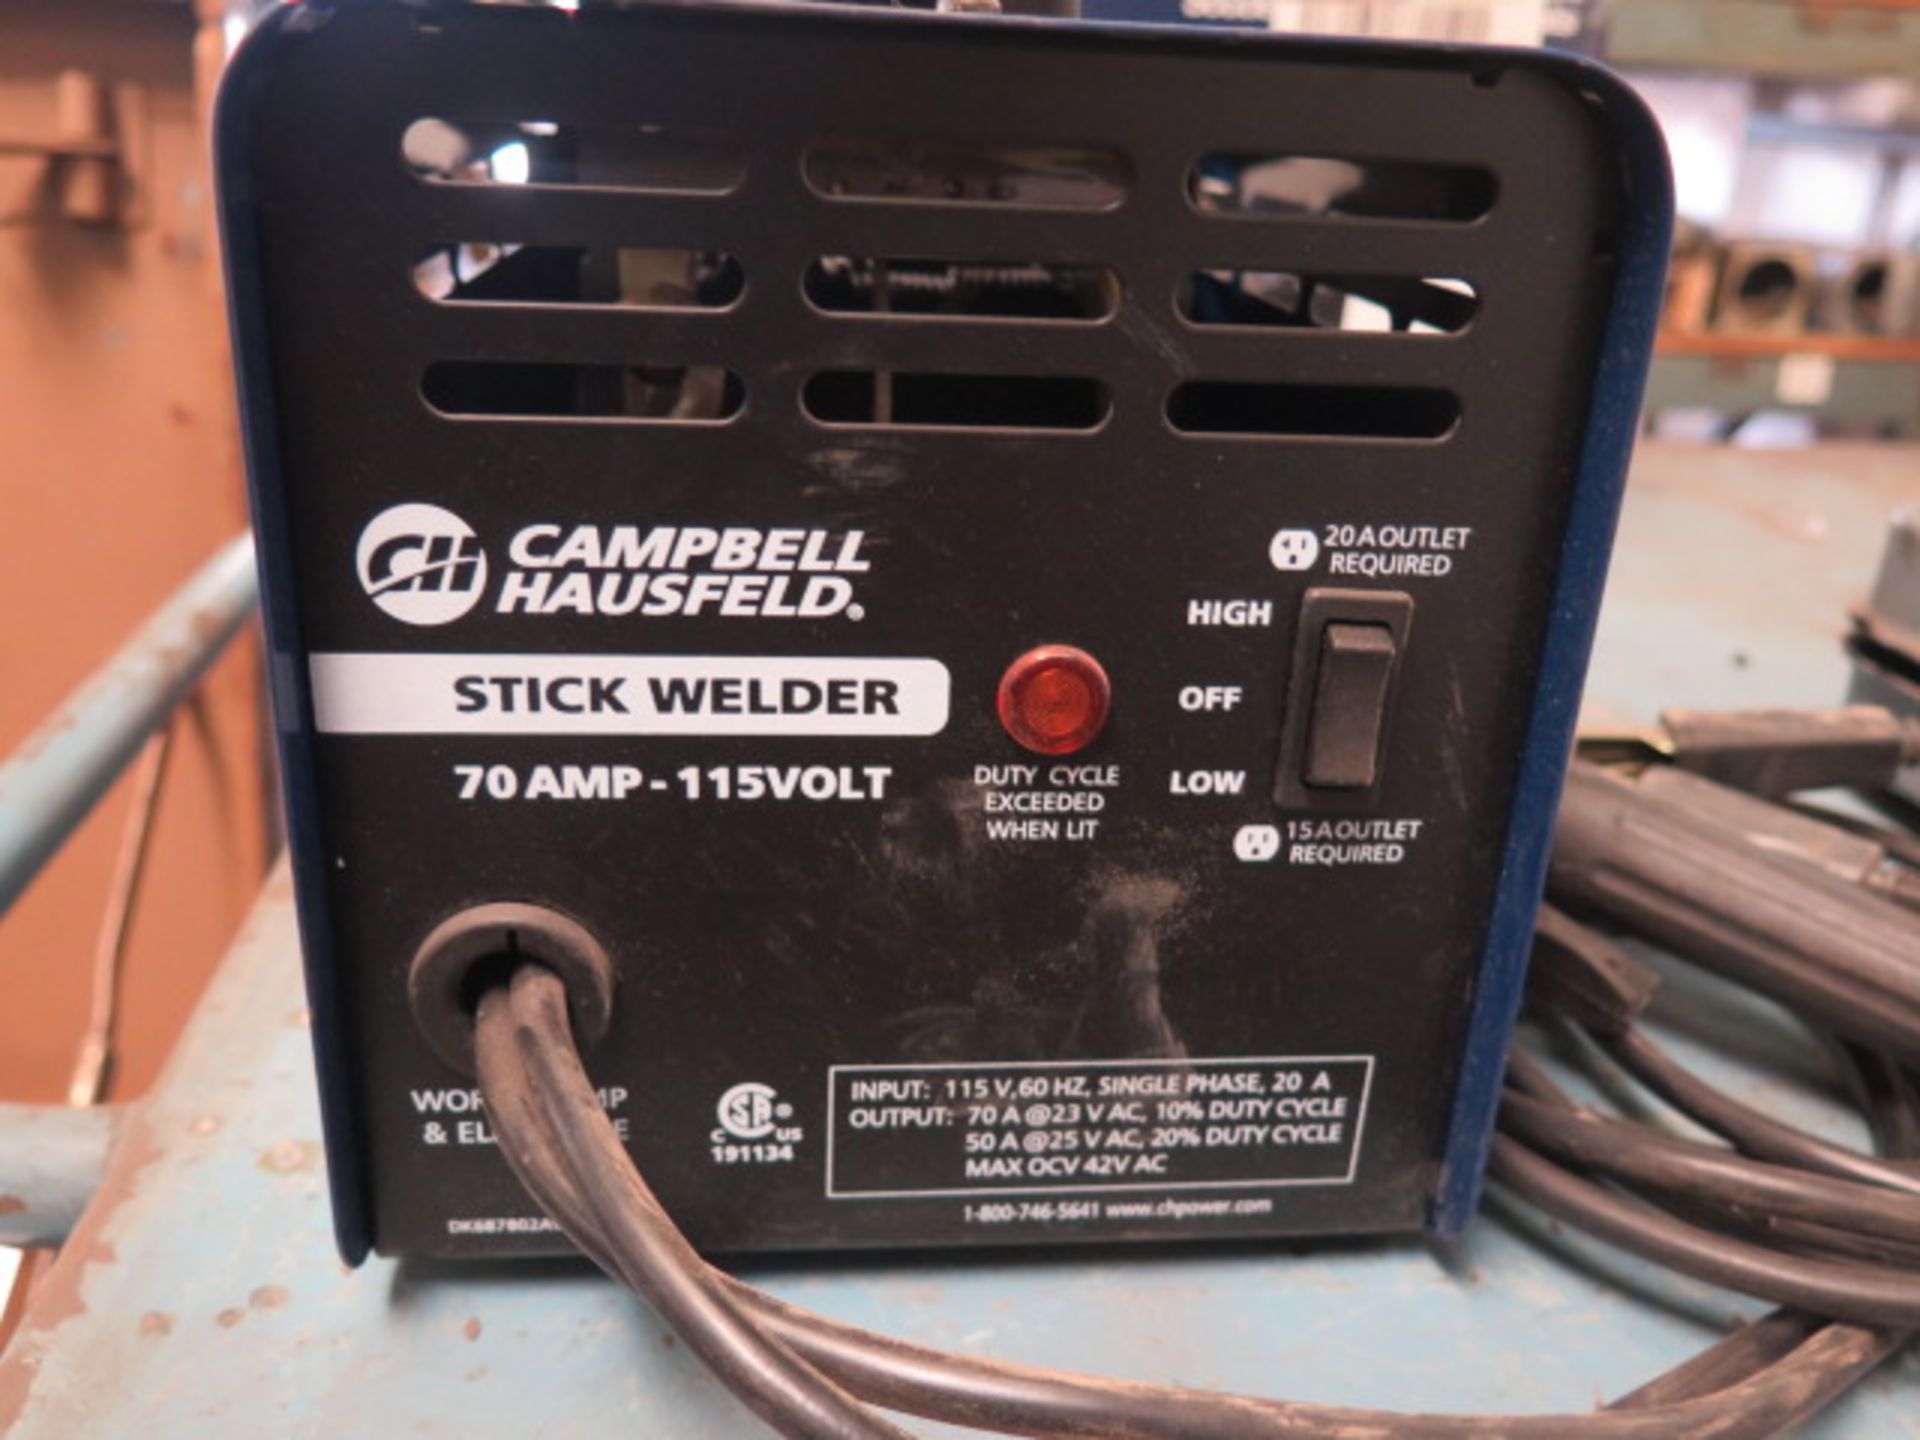 Campbell Hausfeld 70 Amp - 115 Volt Stick Welder (SOLD AS-IS - NO WARRANTY) - Image 3 of 5